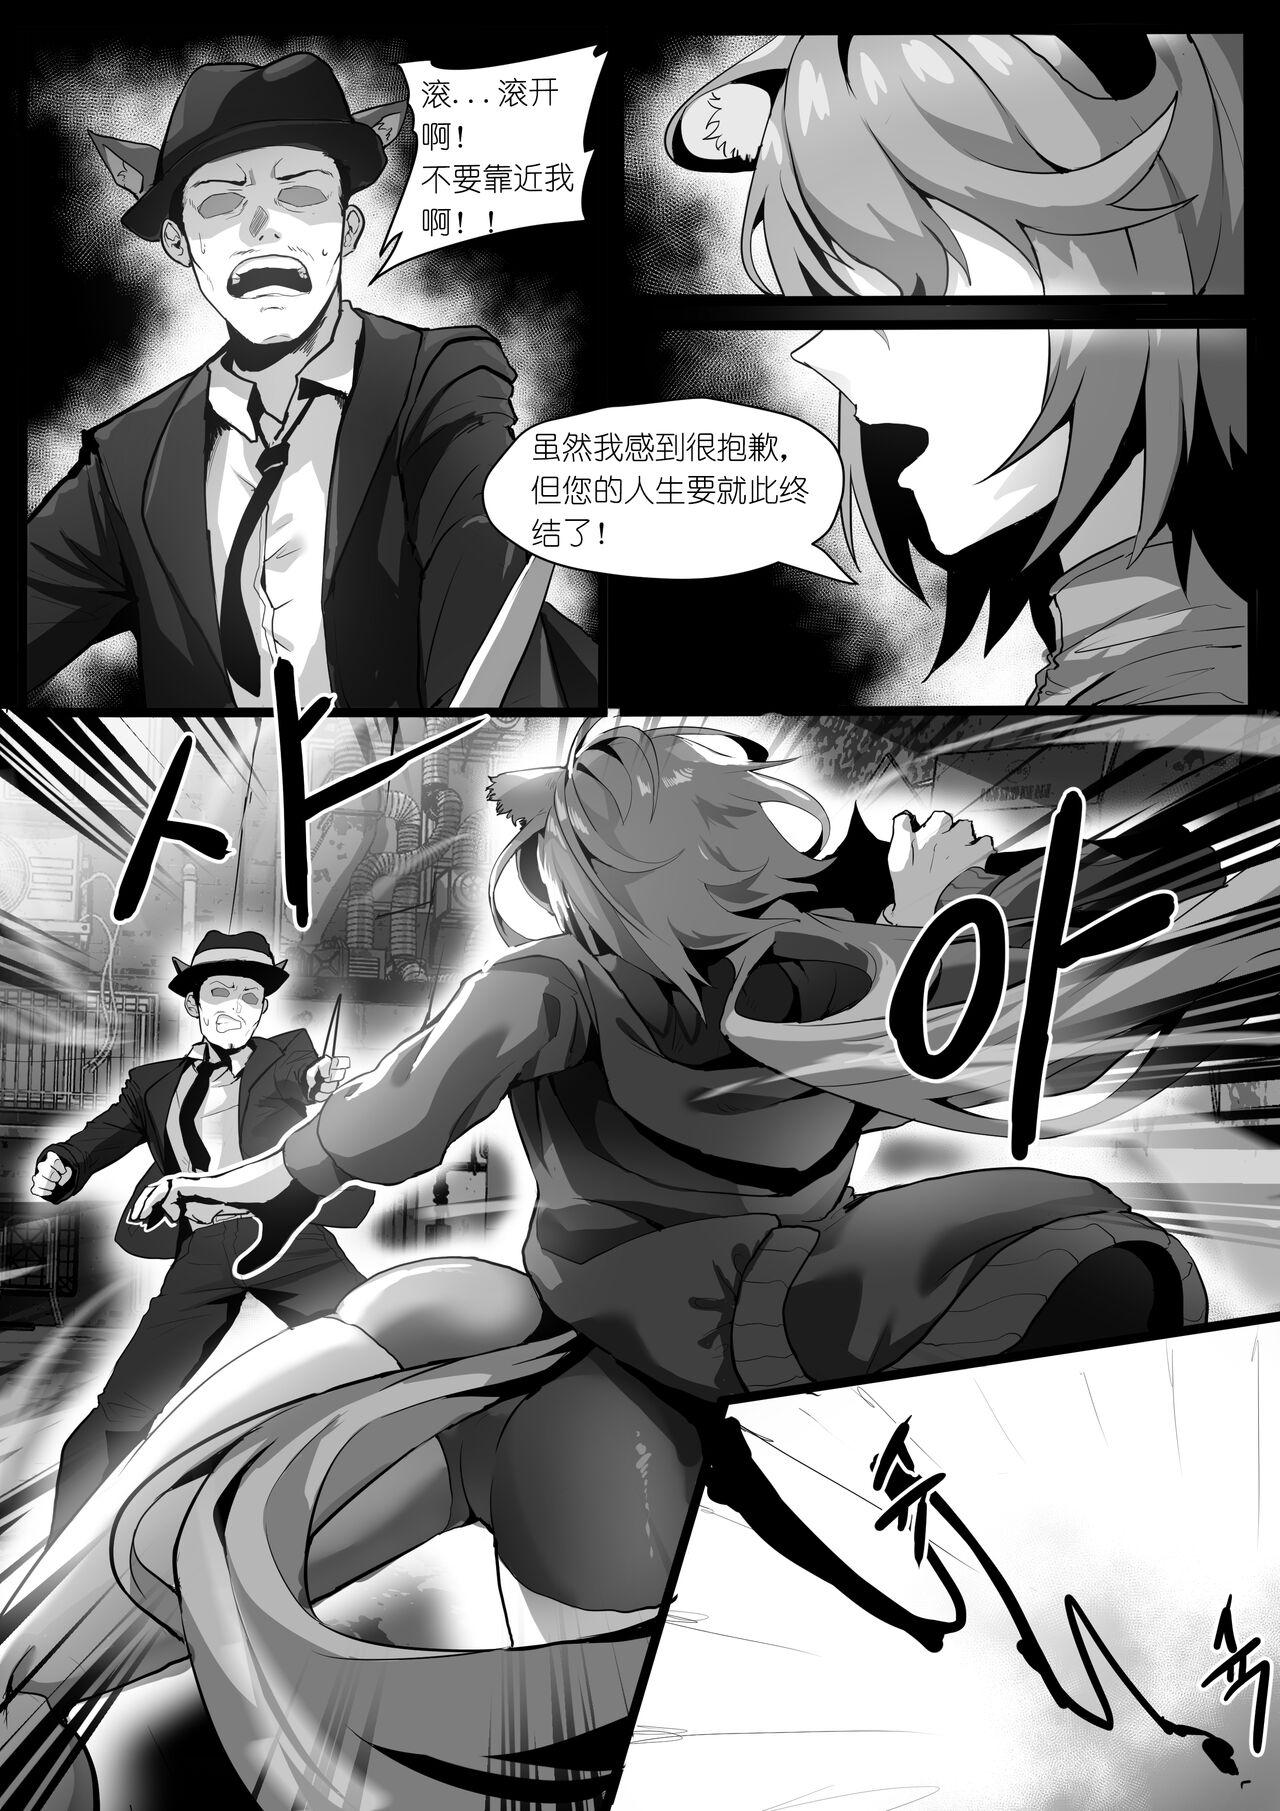 Blowing 欲望方舟记录3 - Arknights Blows - Page 9